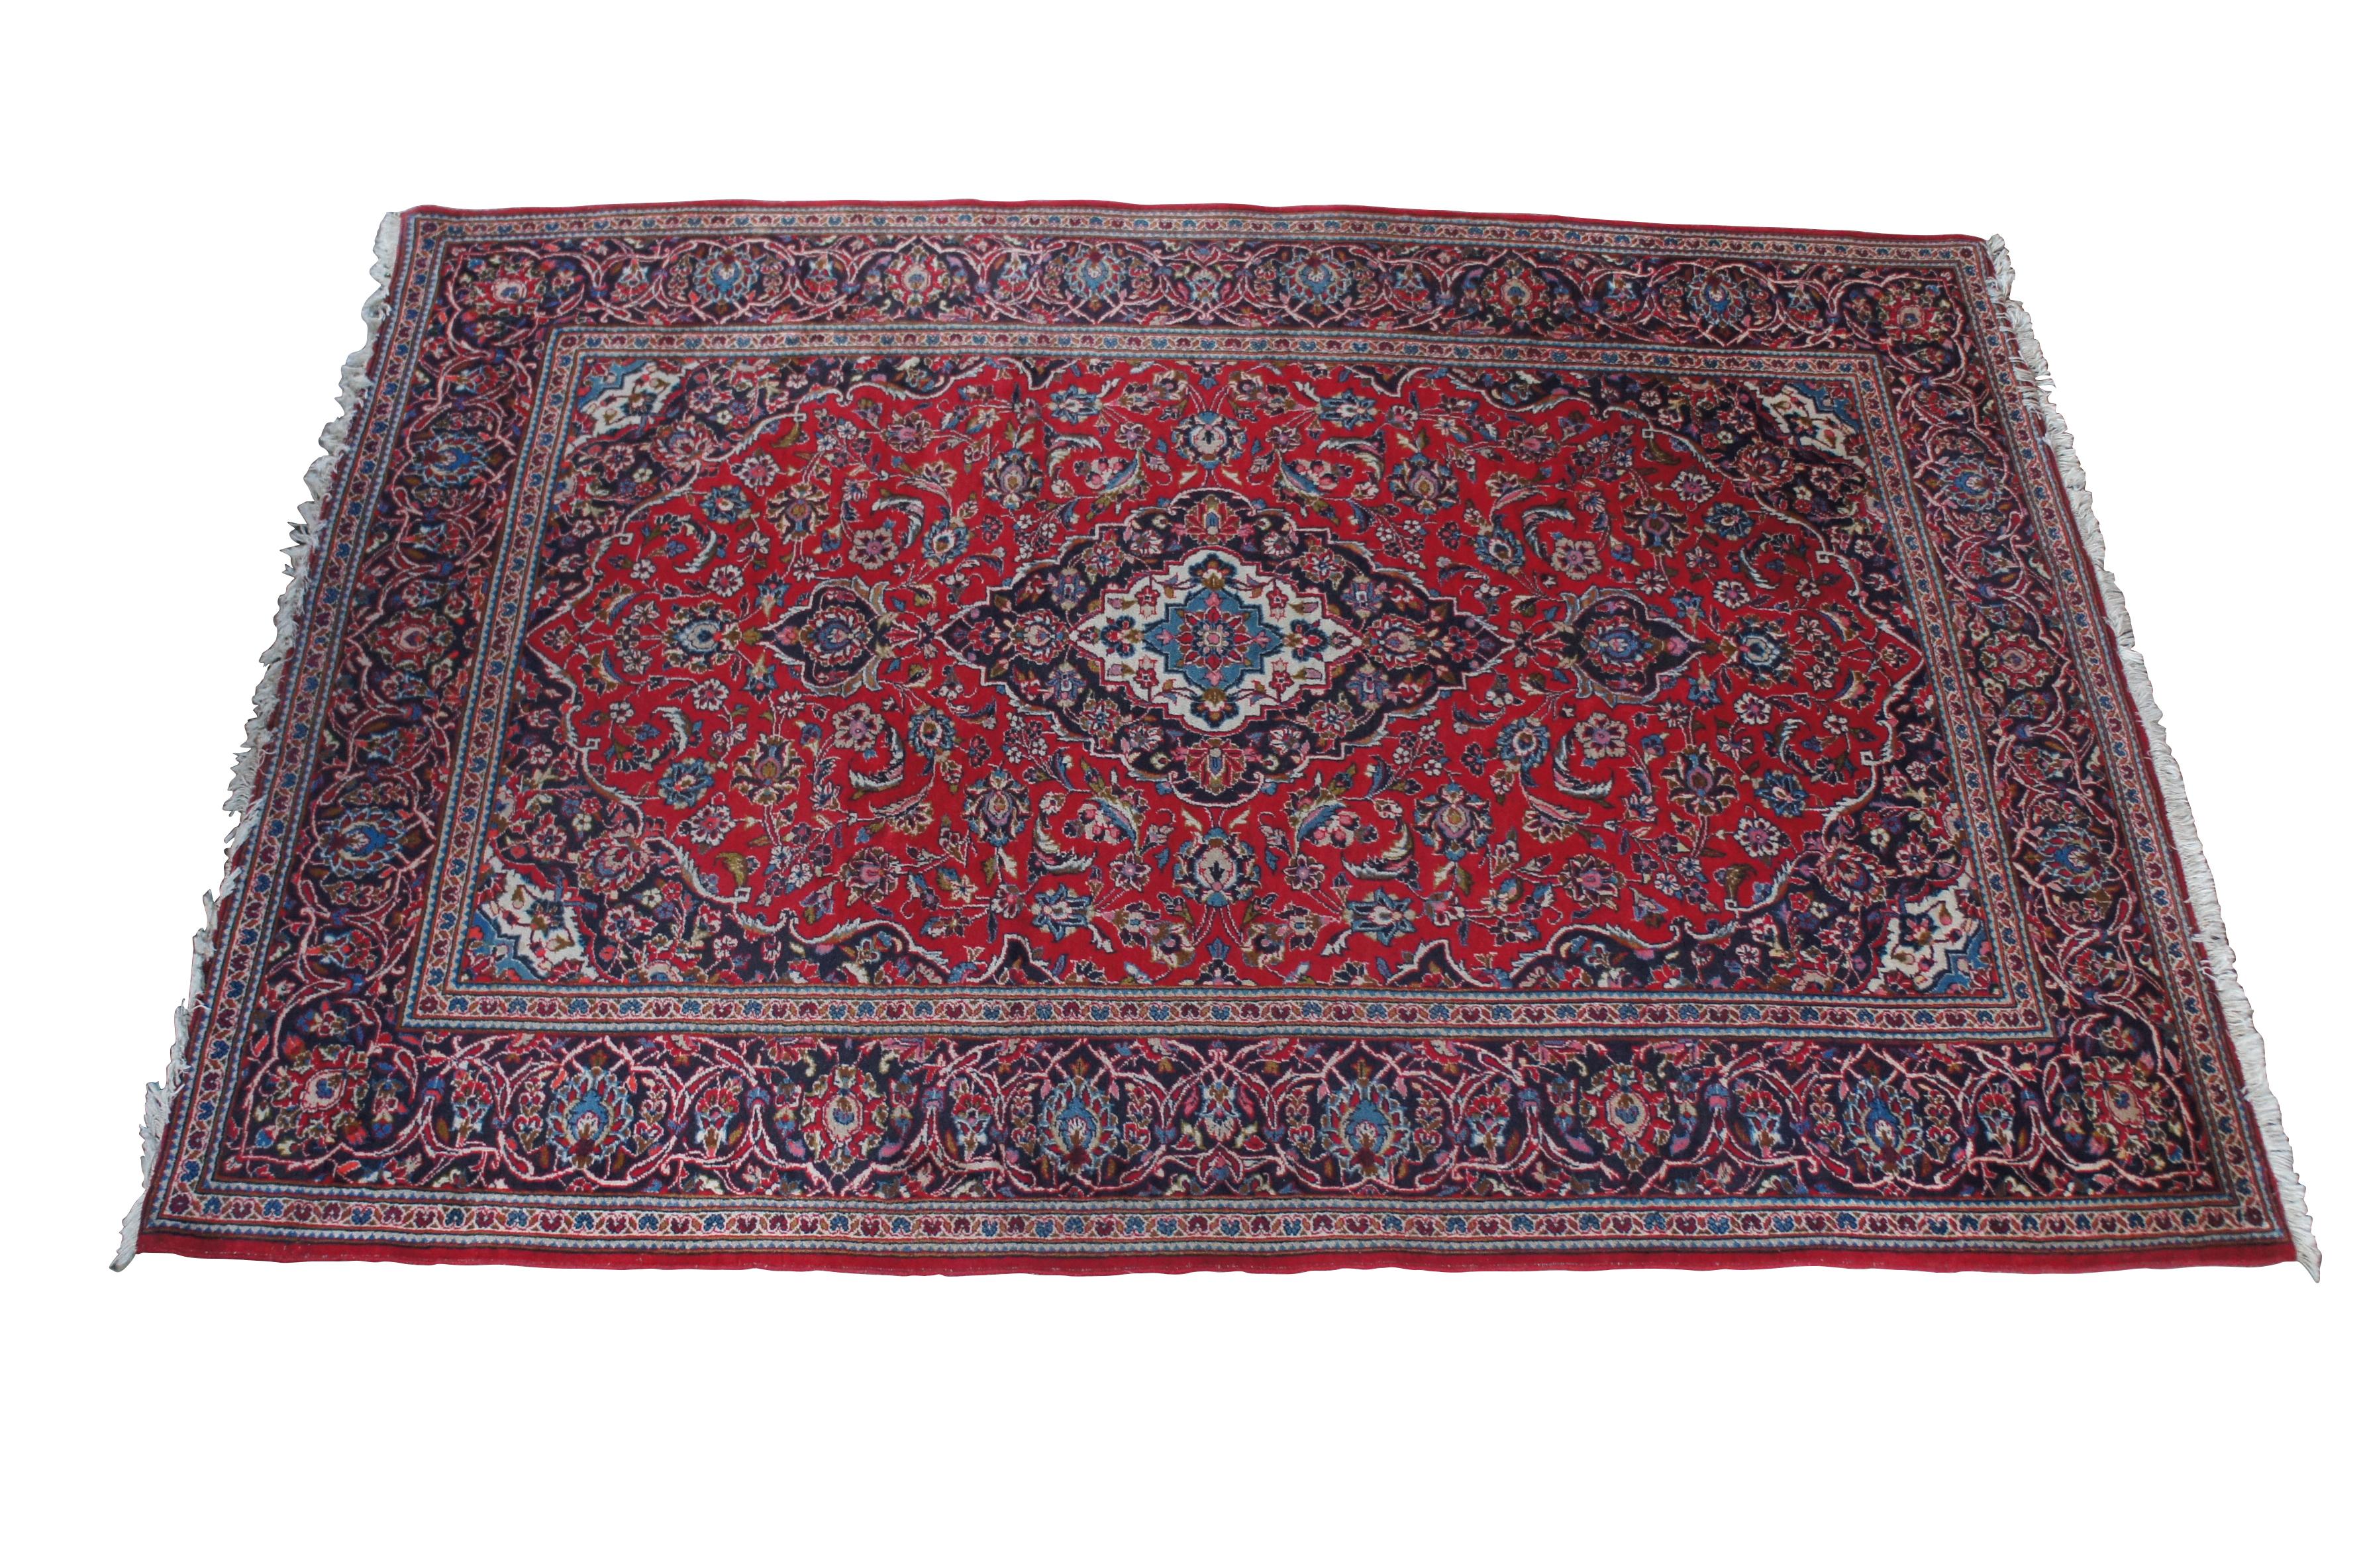 A beautiful red and blue hand knotted Persian Kashan Hand-Knotted wool area rug from the last halfof the 20th century.  Features beautiful floral and geometric detail. 

There are few carpet provenances whose reputation can compete with that of